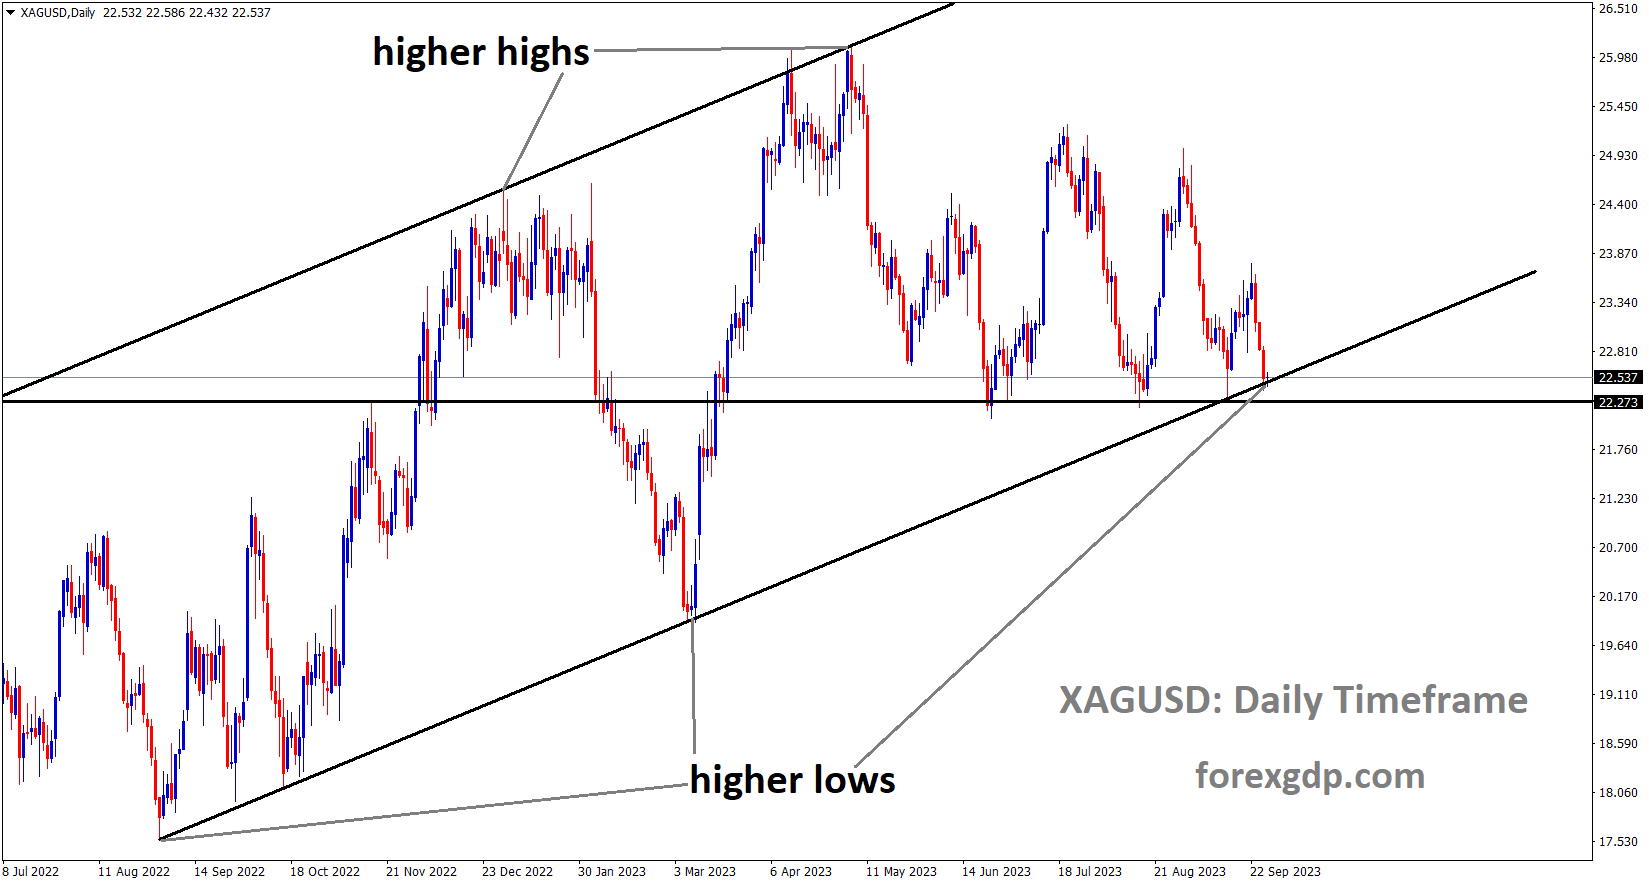 XAGUSD Silver price is moving in an Ascending channel and the market has reached the higher low area of the channel